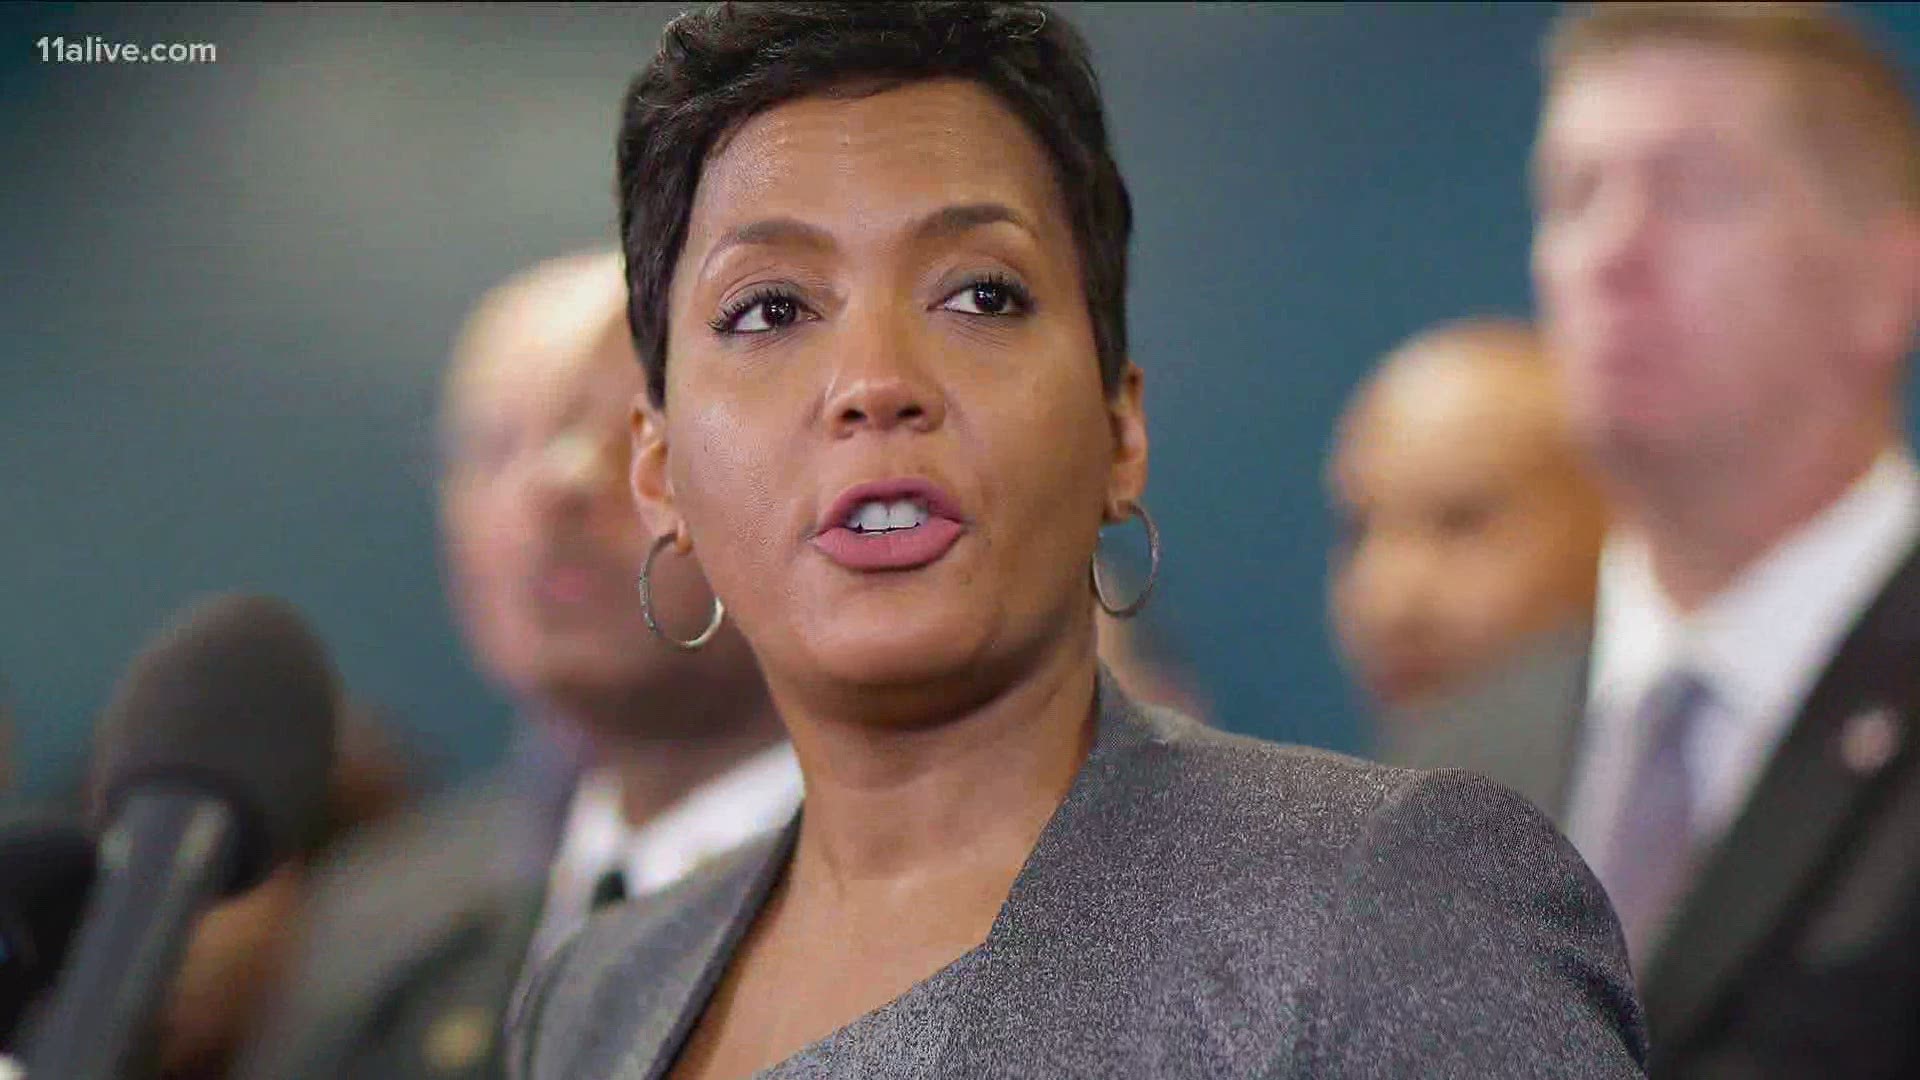 Keisha Lance Bottoms was nominated for Vice Chair of Civic Engagement and Voter Protection